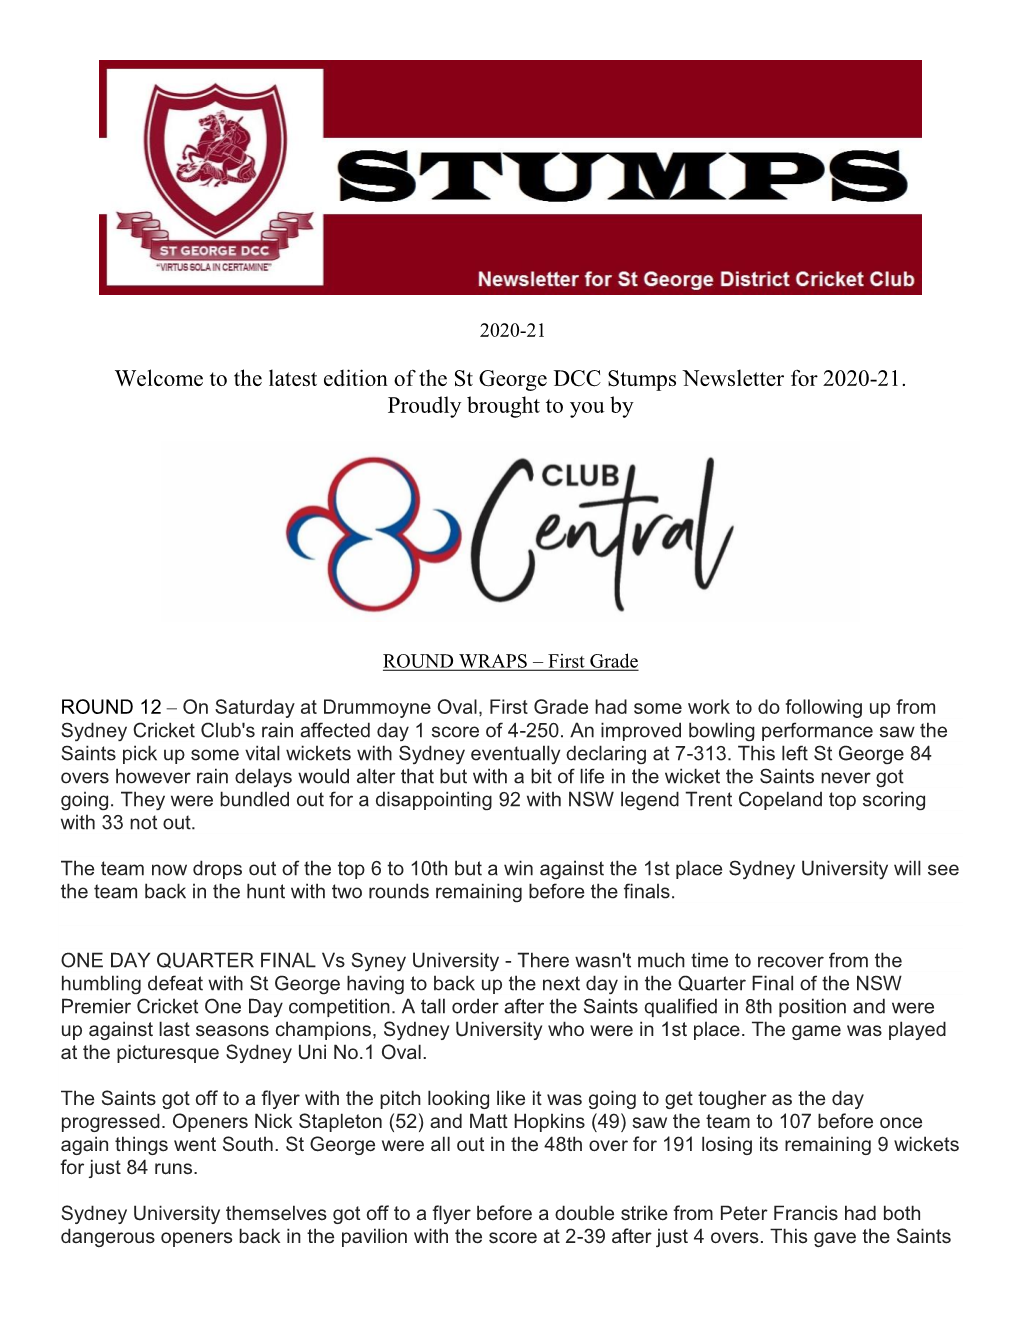 Welcome to the Latest Edition of the St George DCC Stumps Newsletter for 2020-21